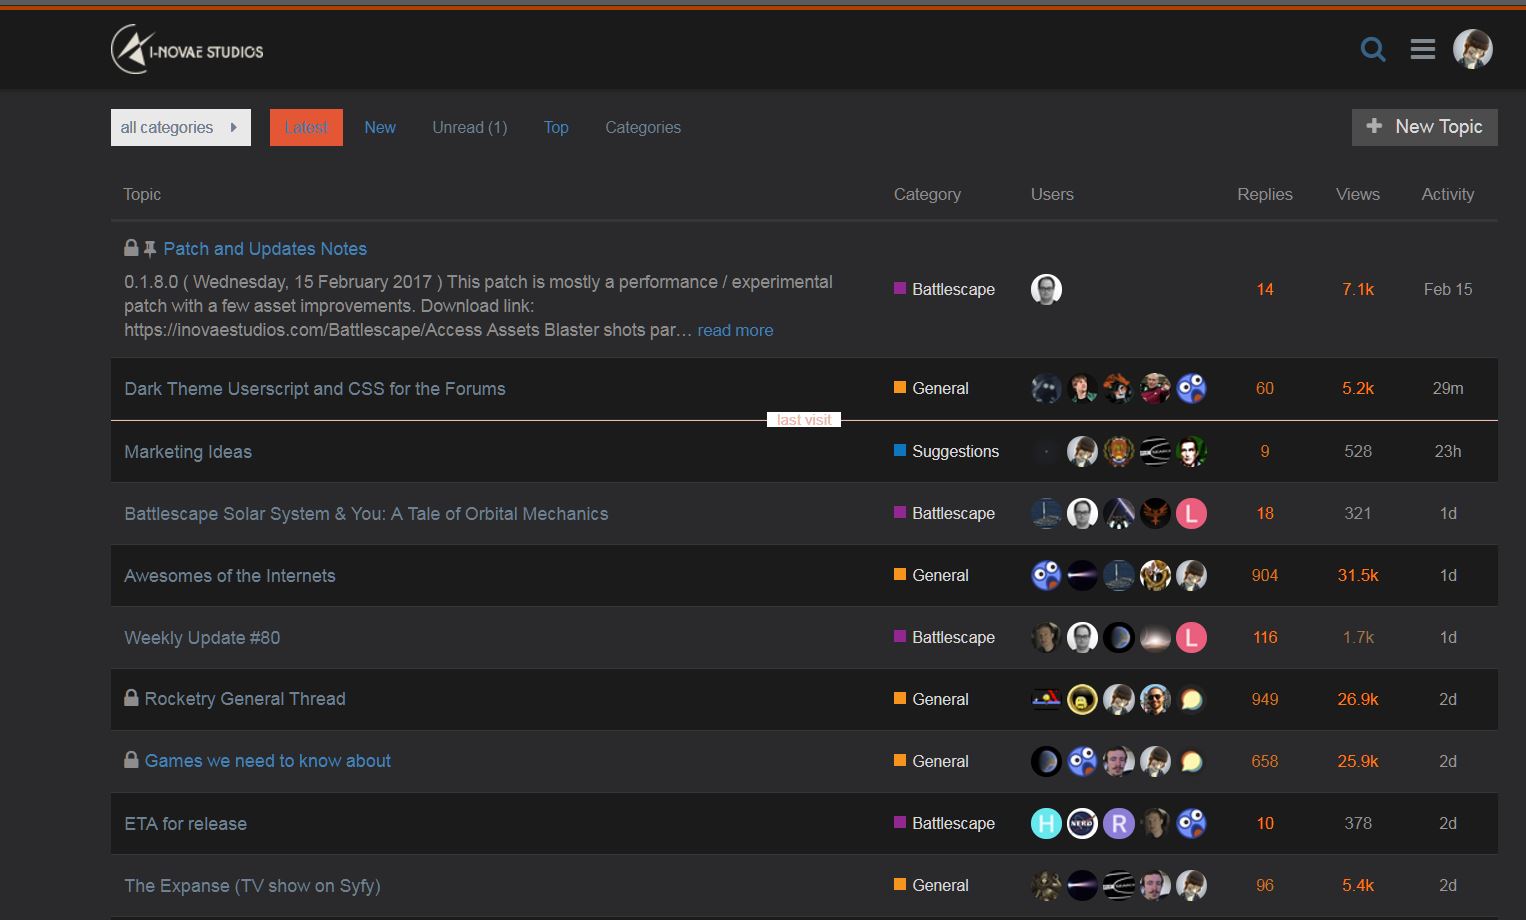 Dark Theme Userscript and CSS for the Forums - General - I-Novae Studios